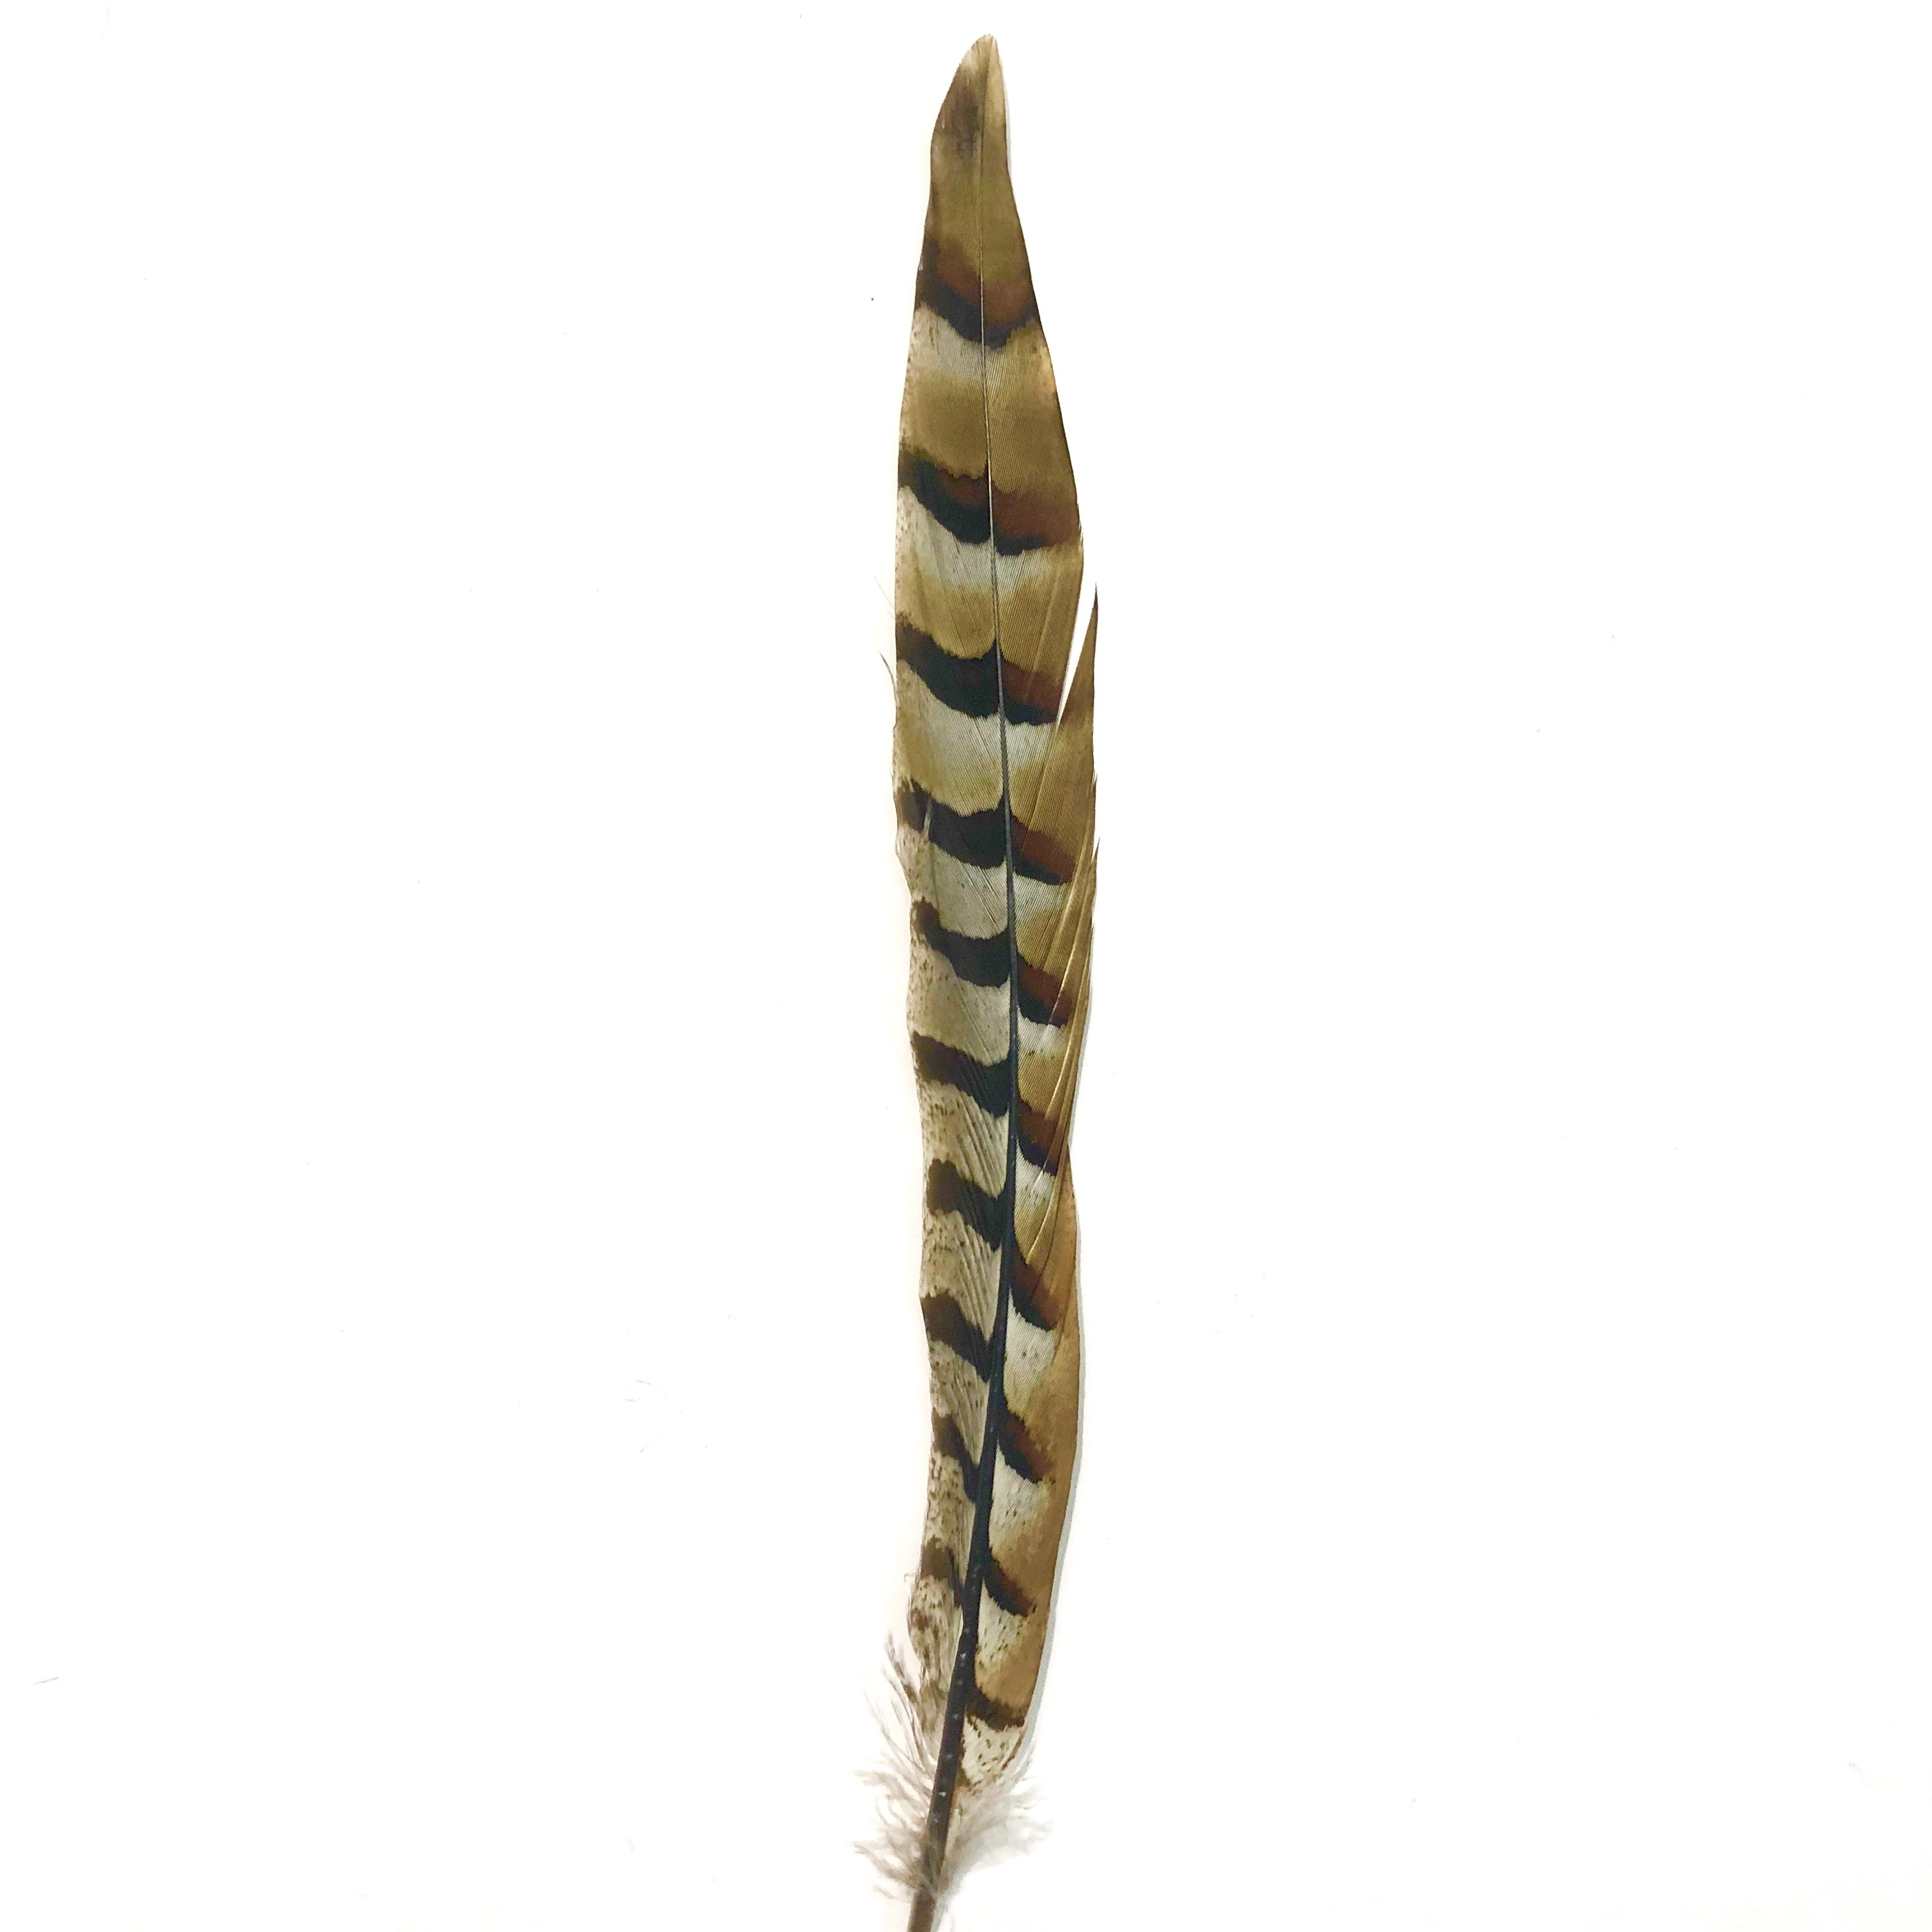 12" to 14" Reeves Pheasant Tail Feather - Natural